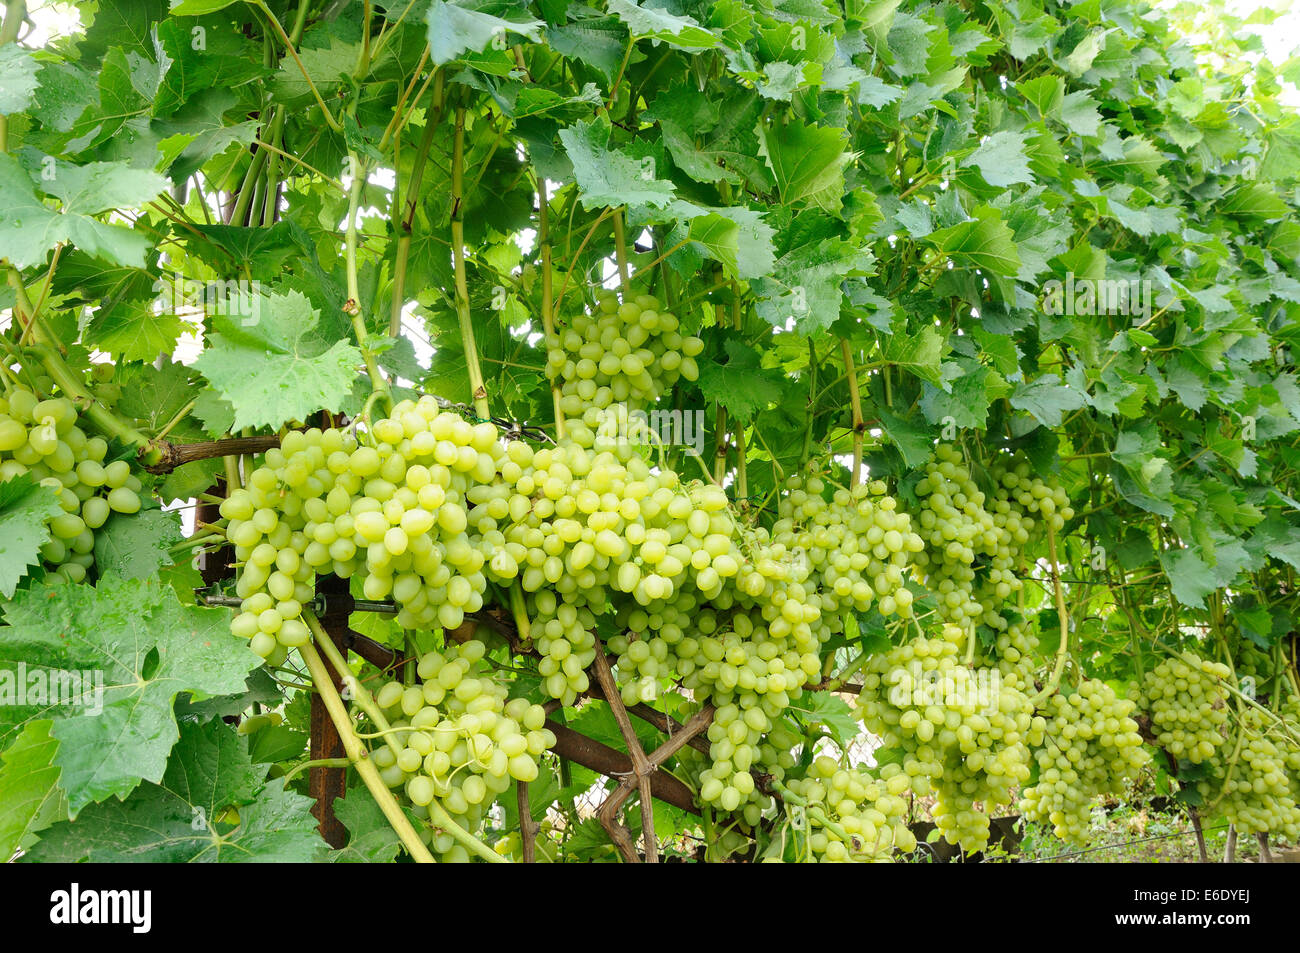 green grapes in a row under lush Stock Photo